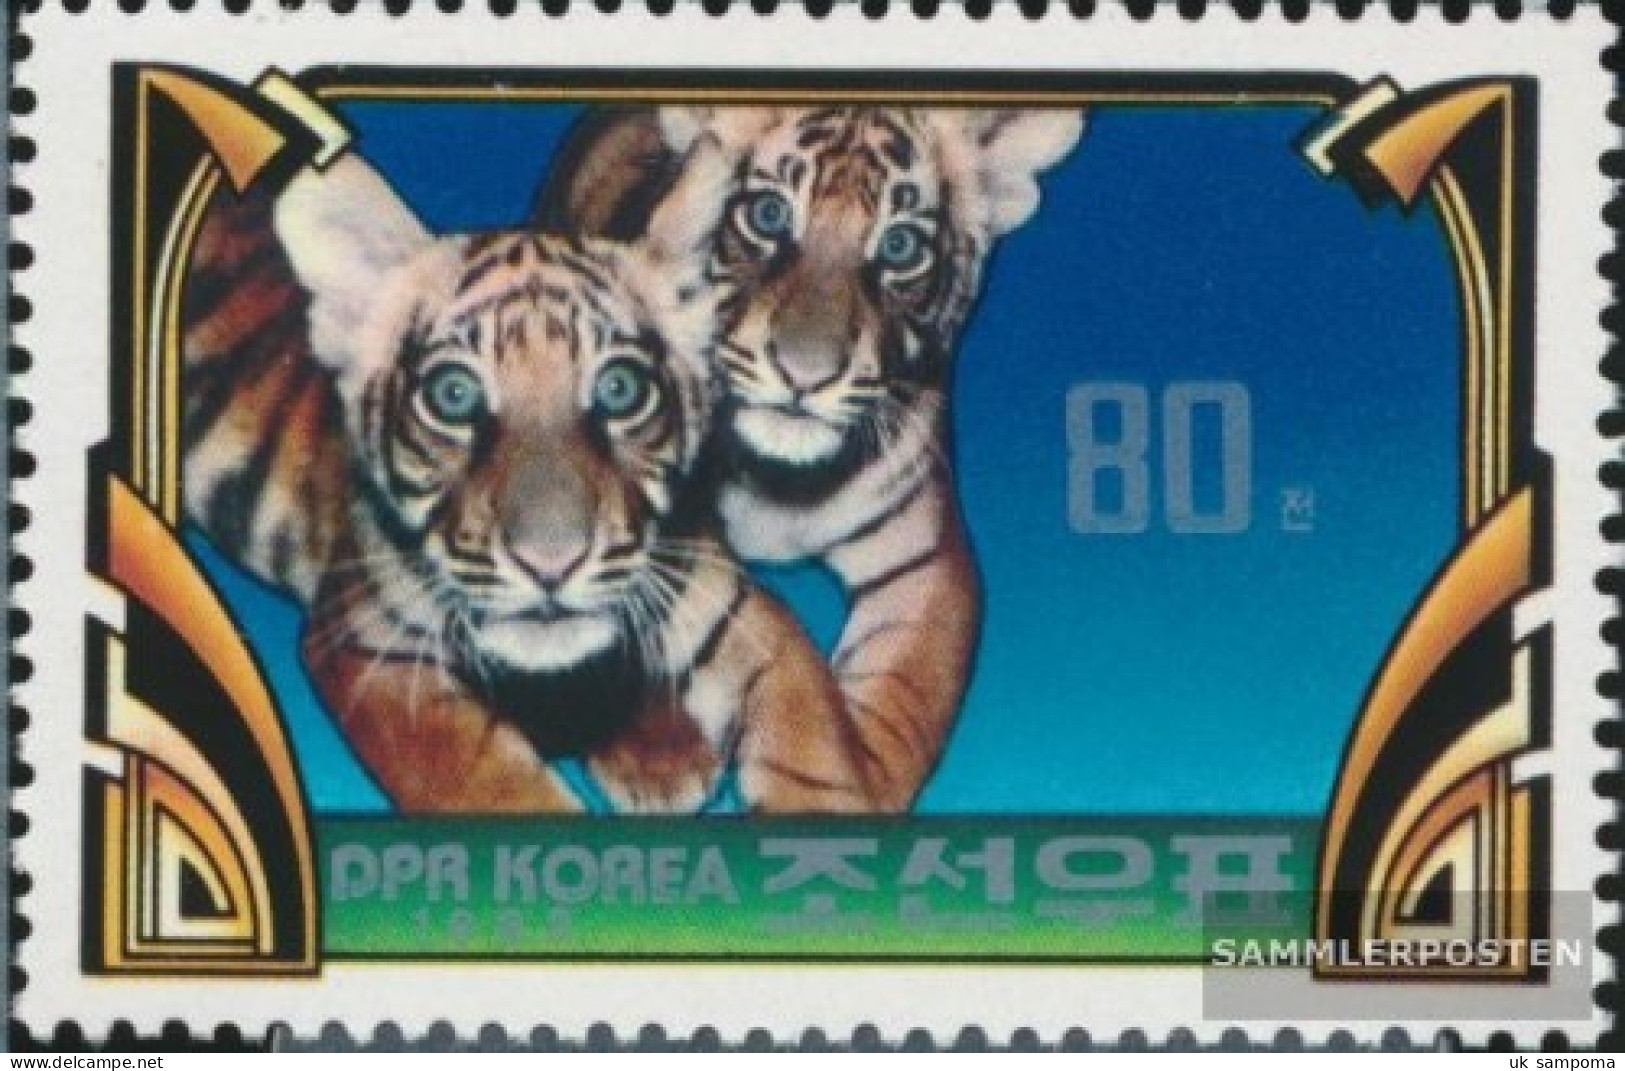 North-Korea 2244A (complete Issue) Unmounted Mint / Never Hinged 1982 Tiger - Corea Del Nord